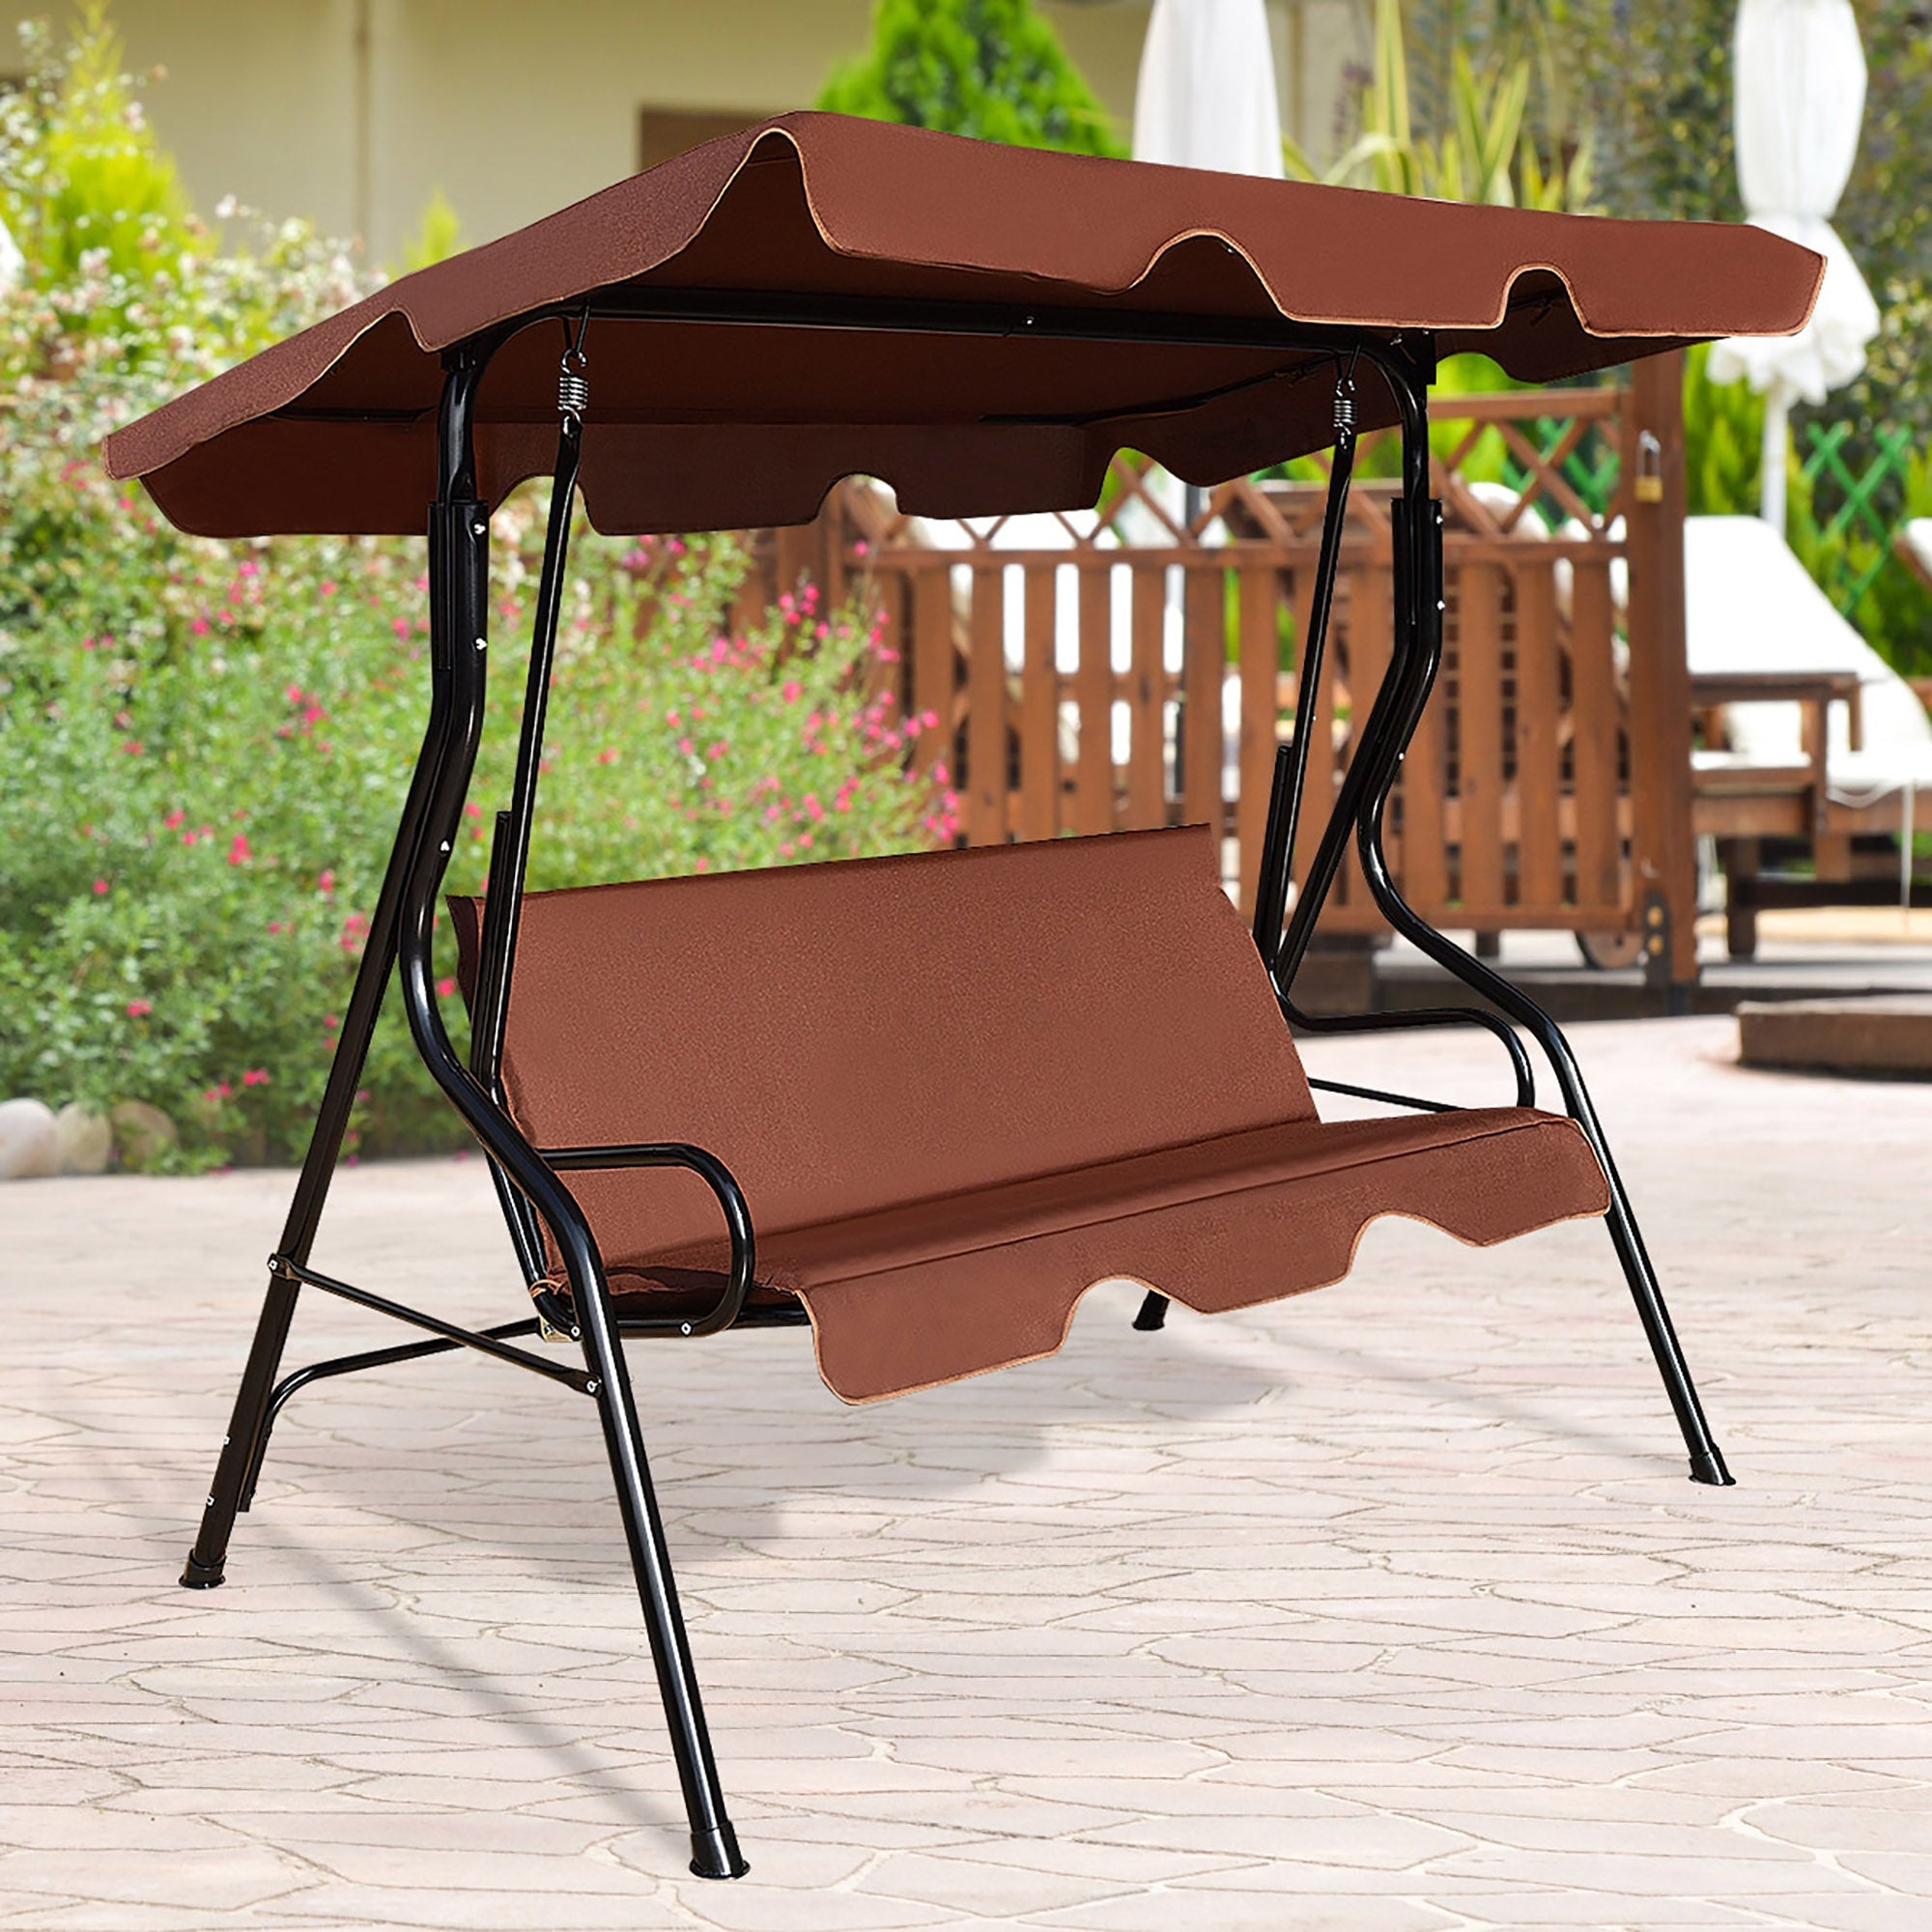 Swing With Canopy Porch Patio Steel Frame Stand 3 Person Sofa Bench Wicker Seat 